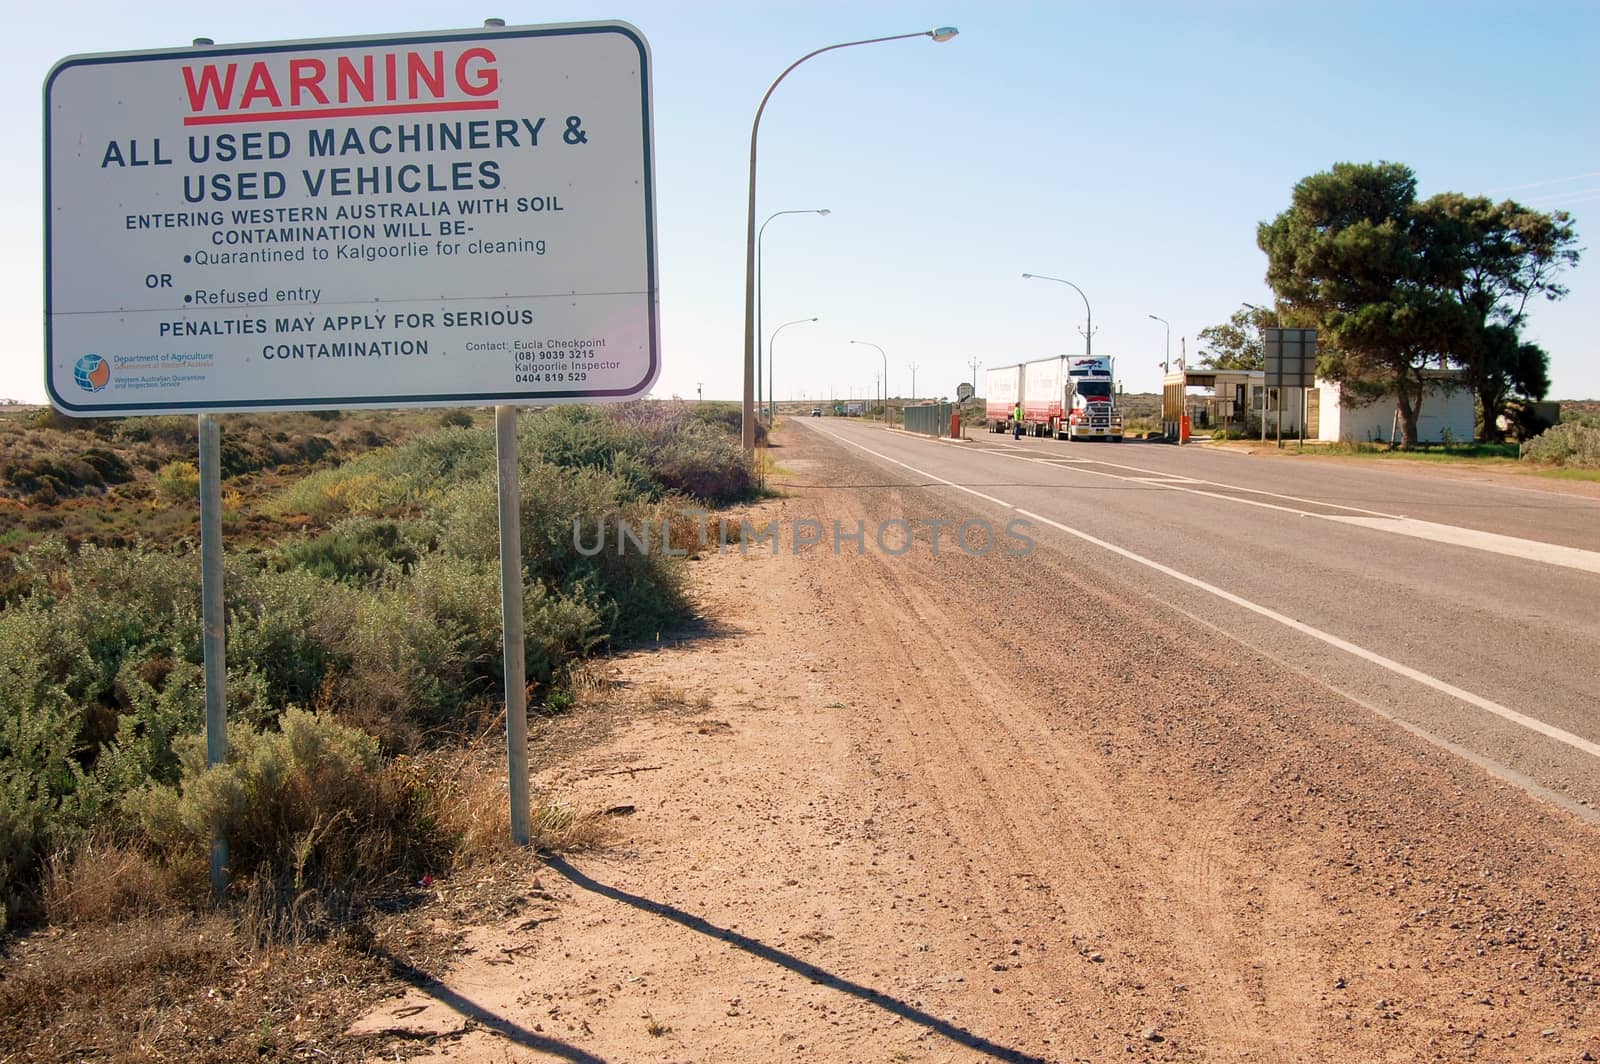 Warning information sign at Western Australia by danemo